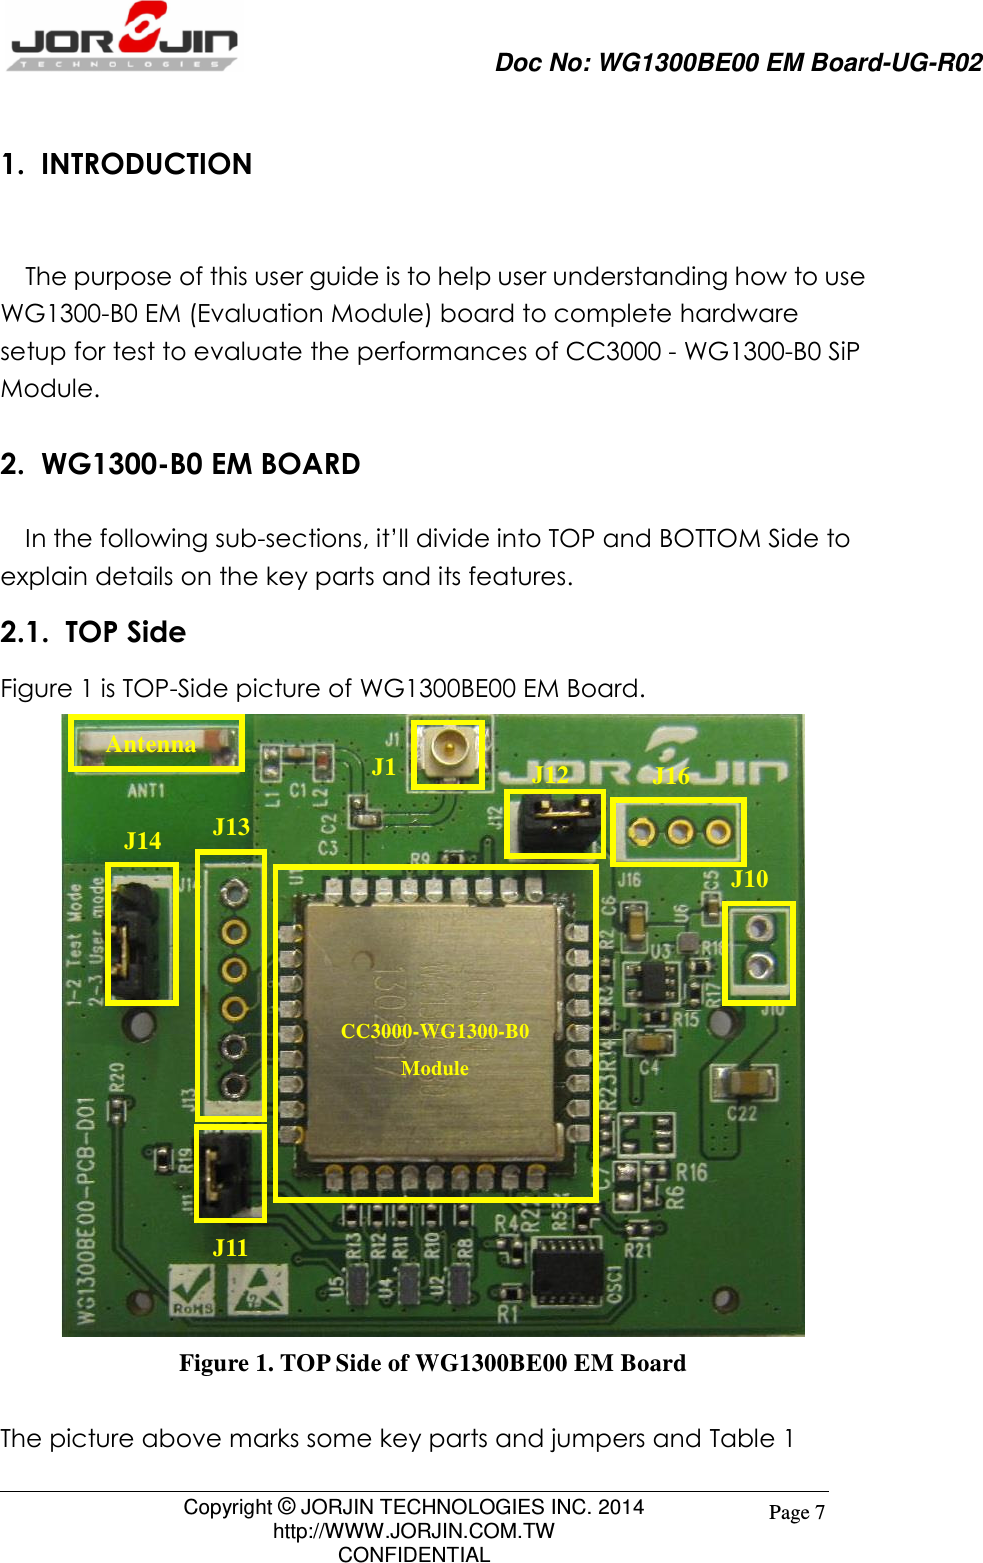                     Doc No: WG1300BE00 EM Board-UG-R02                                                                                        Copyright © JORJIN TECHNOLOGIES INC. 2014 http://WWW.JORJIN.COM.TW CONFIDENTIAL Page 7 1.  INTRODUCTION    The purpose of this user guide is to help user understanding how to use WG1300-B0 EM (Evaluation Module) board to complete hardware setup for test to evaluate the performances of CC3000 - WG1300-B0 SiP Module. 2.  WG1300-B0 EM BOARD   In the following sub-sections, it’ll divide into TOP and BOTTOM Side to explain details on the key parts and its features.   2.1.  TOP Side Figure 1 is TOP-Side picture of WG1300BE00 EM Board.  Figure 1. TOP Side of WG1300BE00 EM Board  The picture above marks some key parts and jumpers and Table 1 J10 J14 J16 J13 J1 Antenna CC3000-WG1300-B0 Module J11 J12 